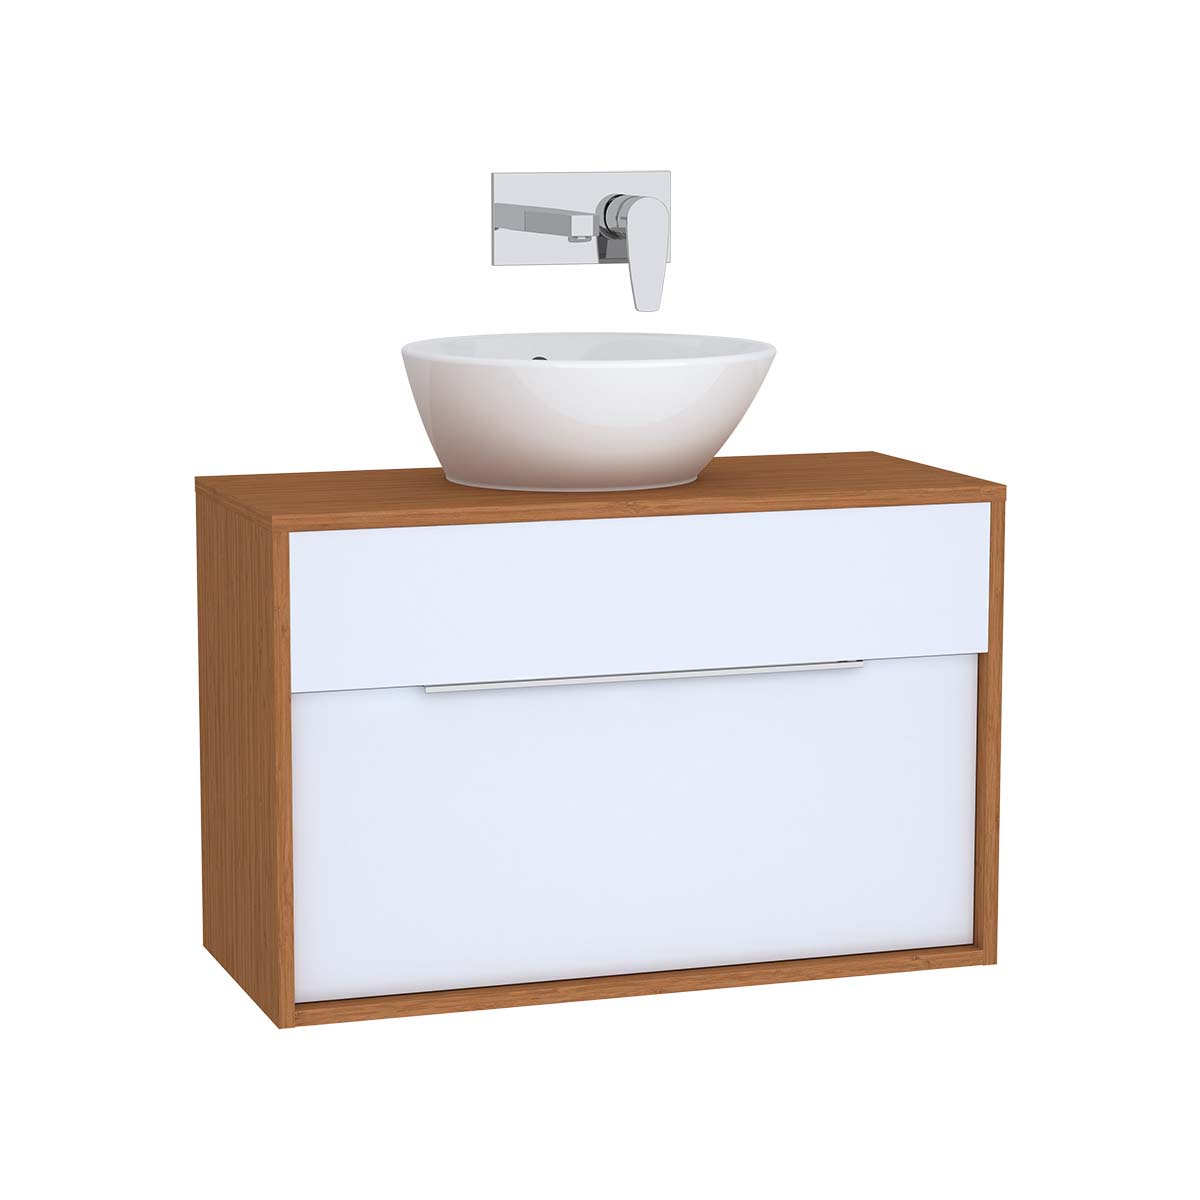 Integra Washbasin Unit, 80 cm, with 1 drawer, for countertop basins, with 34 cm depth, White High Gloss & Bamboo